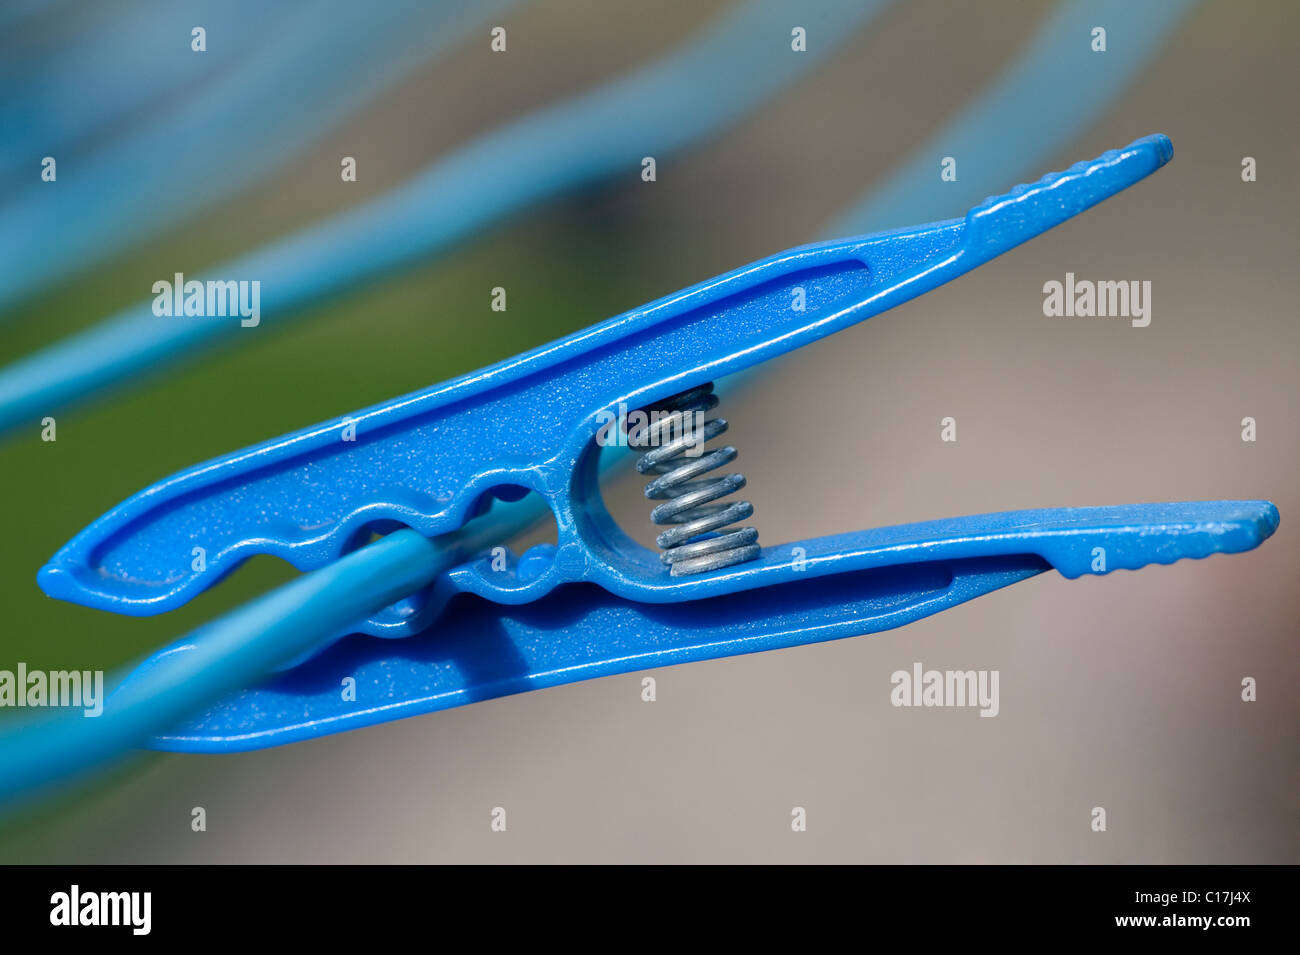 Close-up image of a plastic blue clothespeg hanging on a clothesline. Stock Photo